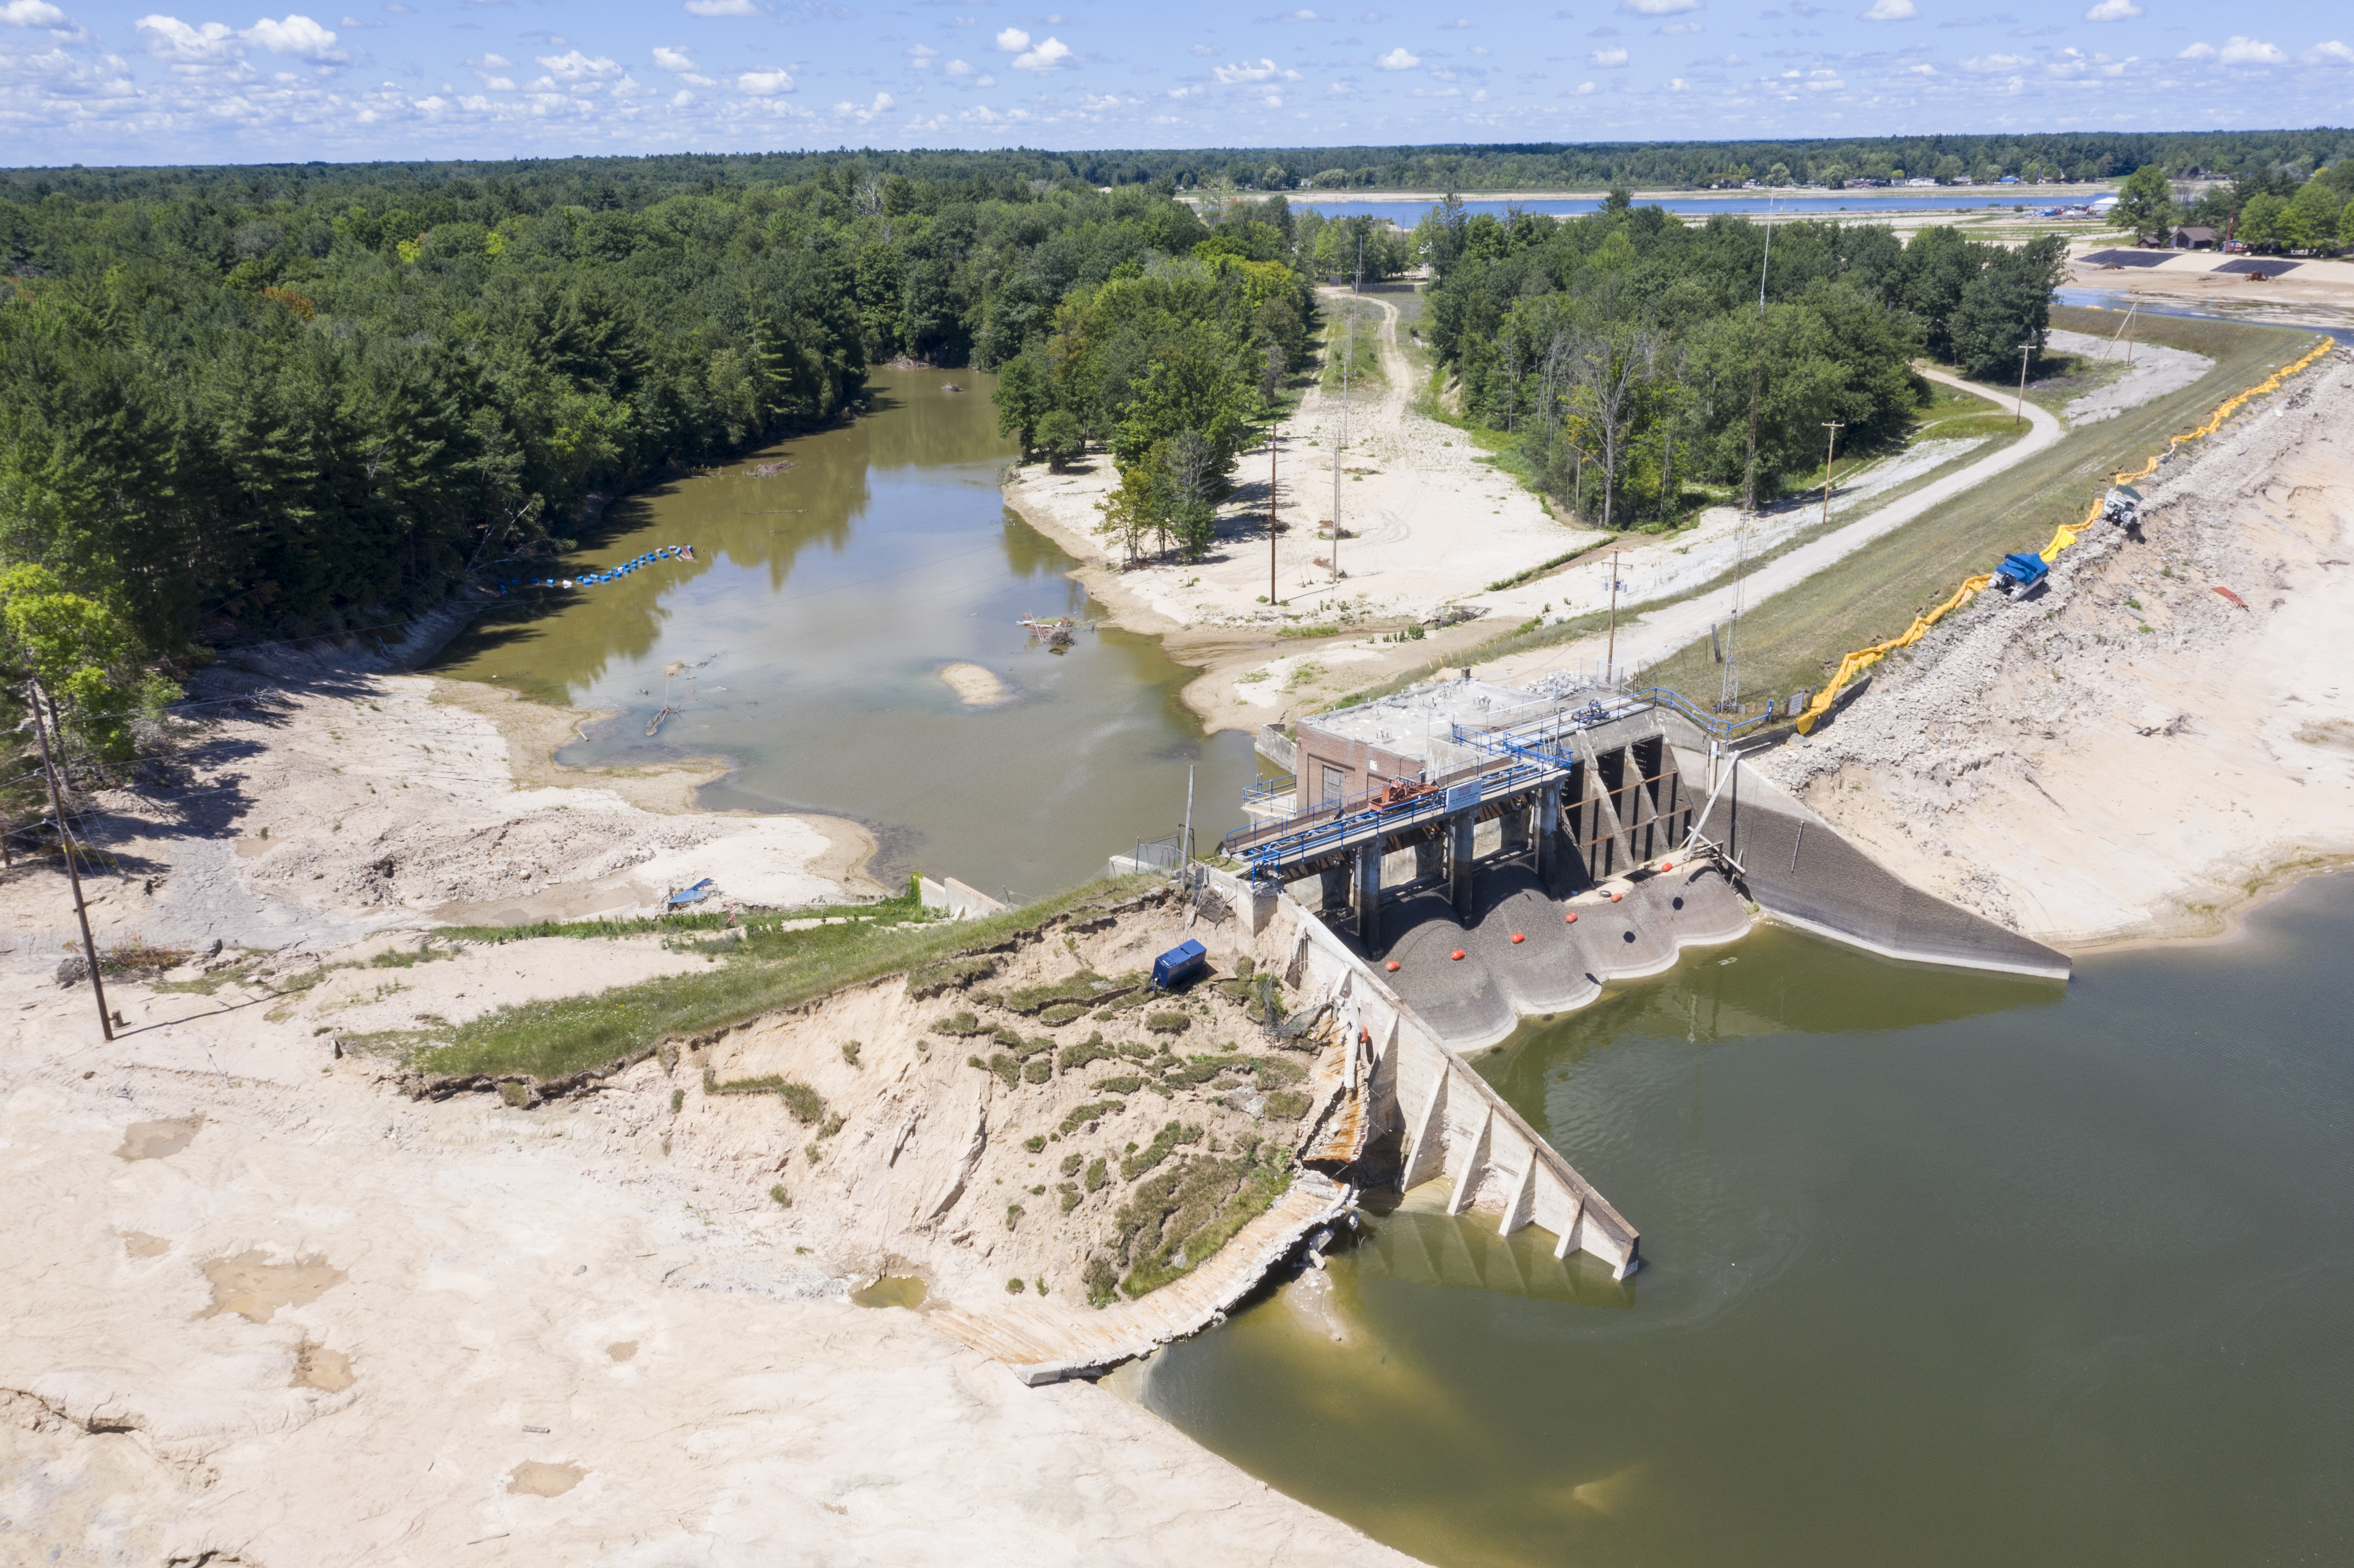 A view of the Edenville Dam in Hope Township on Thursday, July 30, 2020. The devastating flood in May gushed over the majority of land in this area. (Kaytie Boomer | MLive.com)